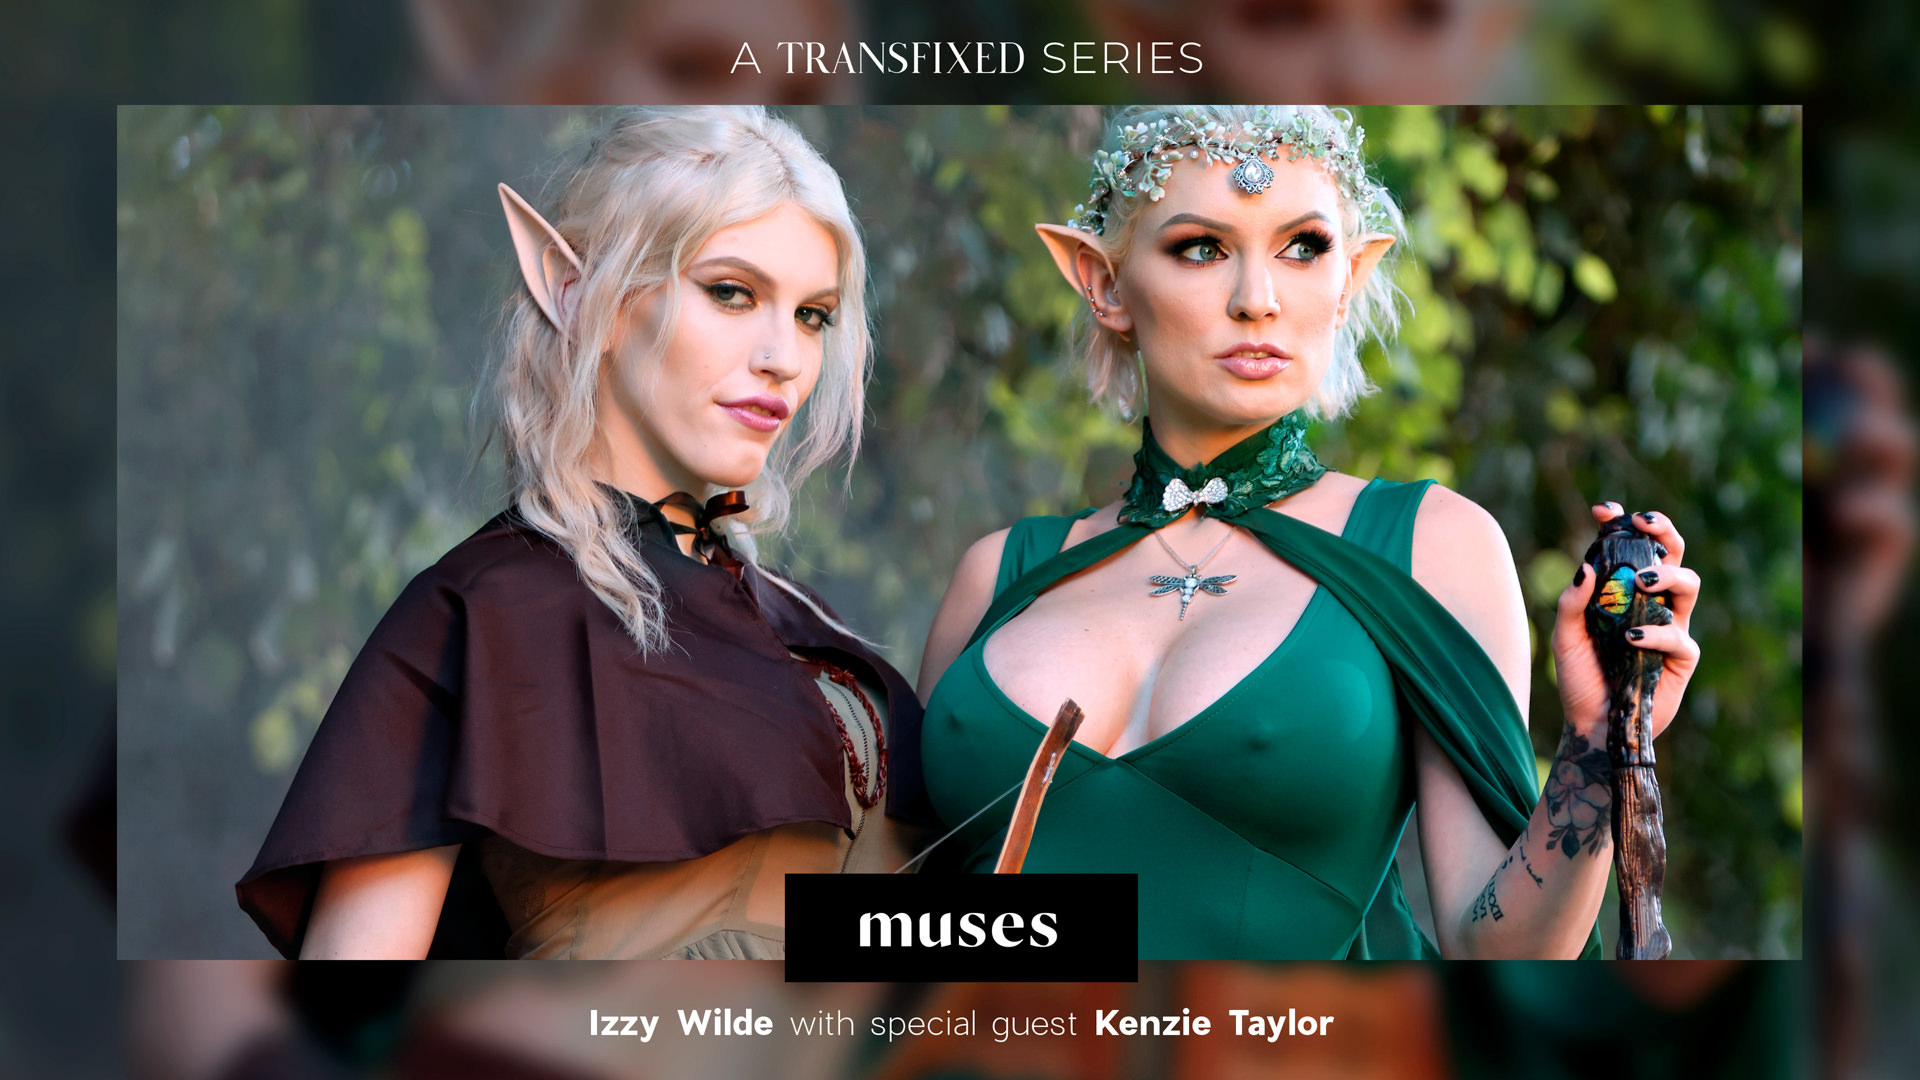 MUSES: Izzy Wilde, Scene #01 in Transfixed series with Kenzie Taylor, Izzy Wilde by Adult Time